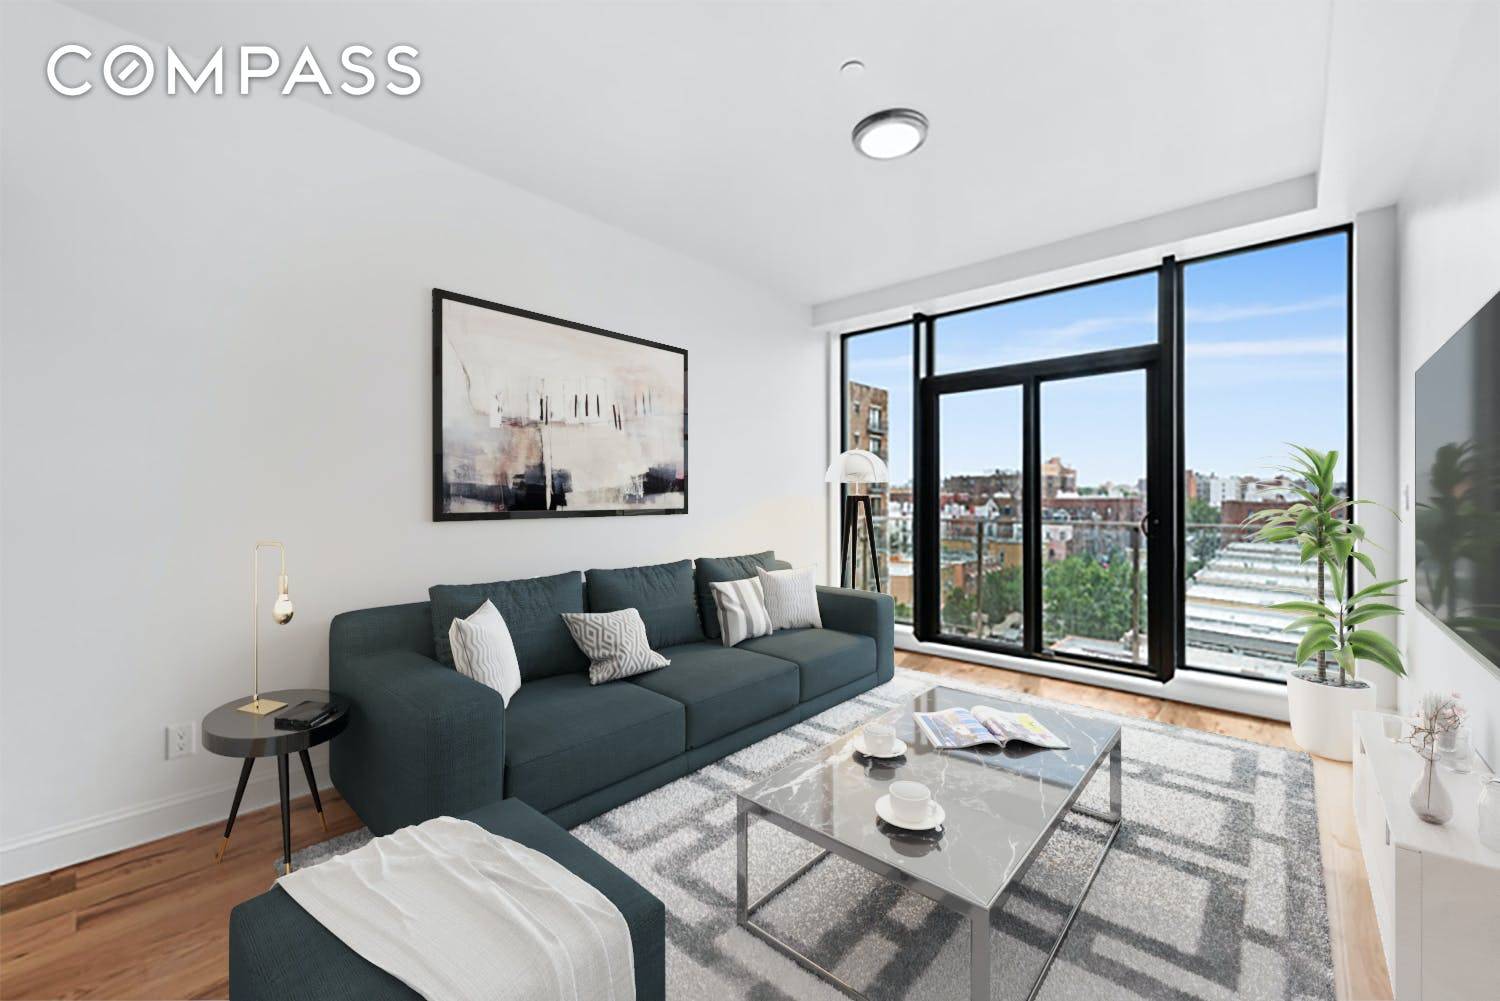 Welcome to 28 06 21st Street, a new development boutique condominium featuring chic contemporary style, private outdoor space and outstanding amenities in sought after Astoria.